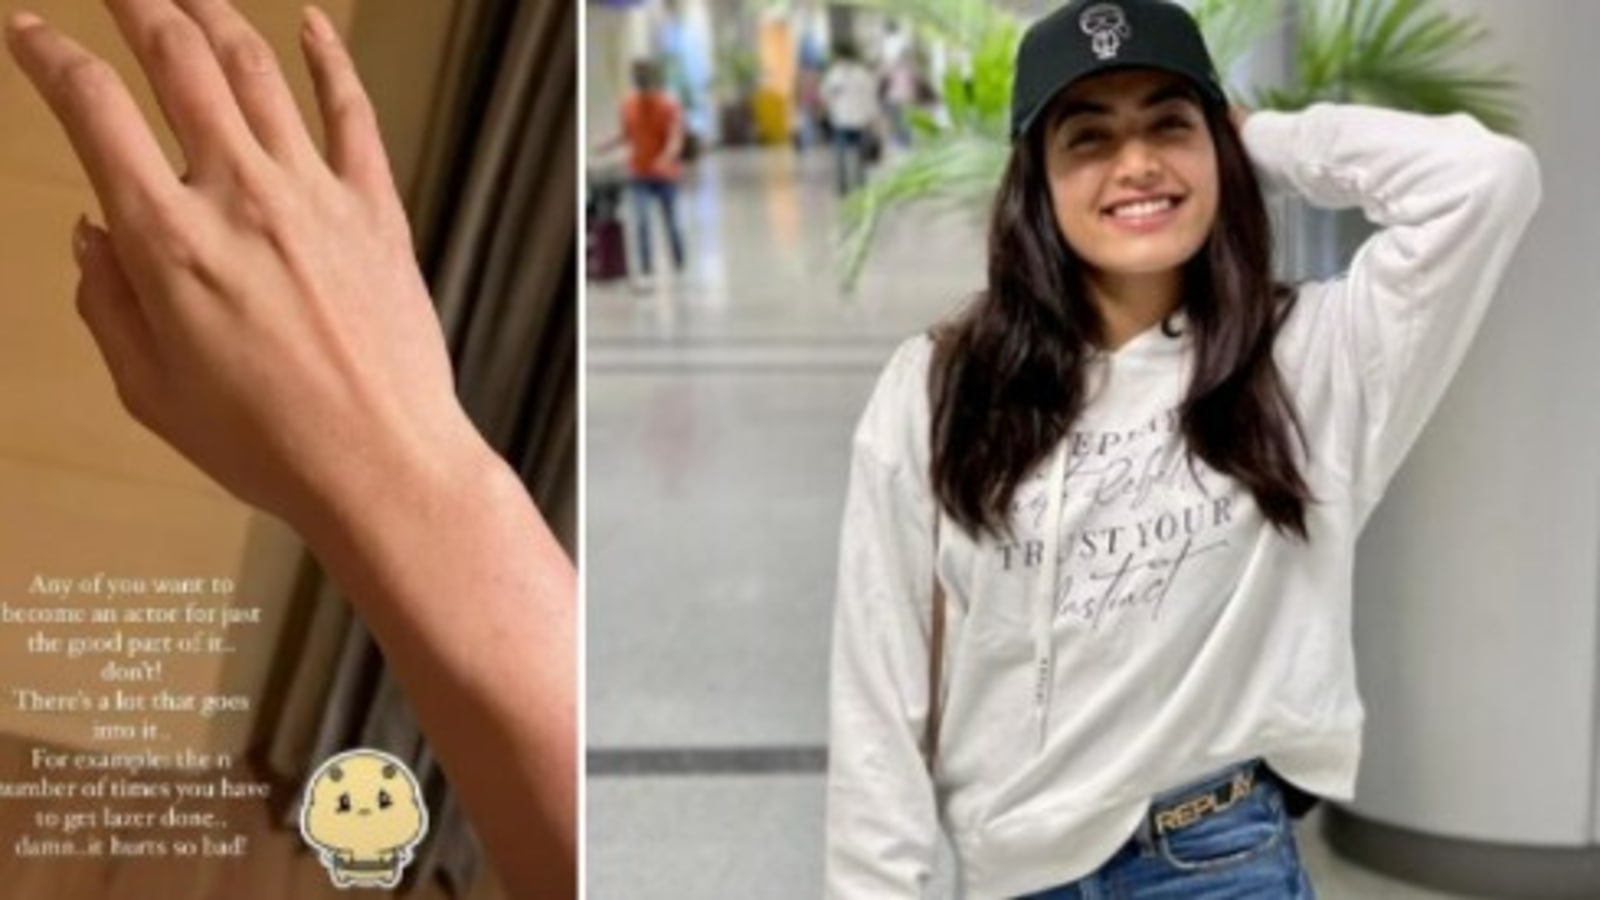 Rashmika Mandanna shares pic of her arm, talks about ‘the number of times you’ve to get laser done’: It hurts